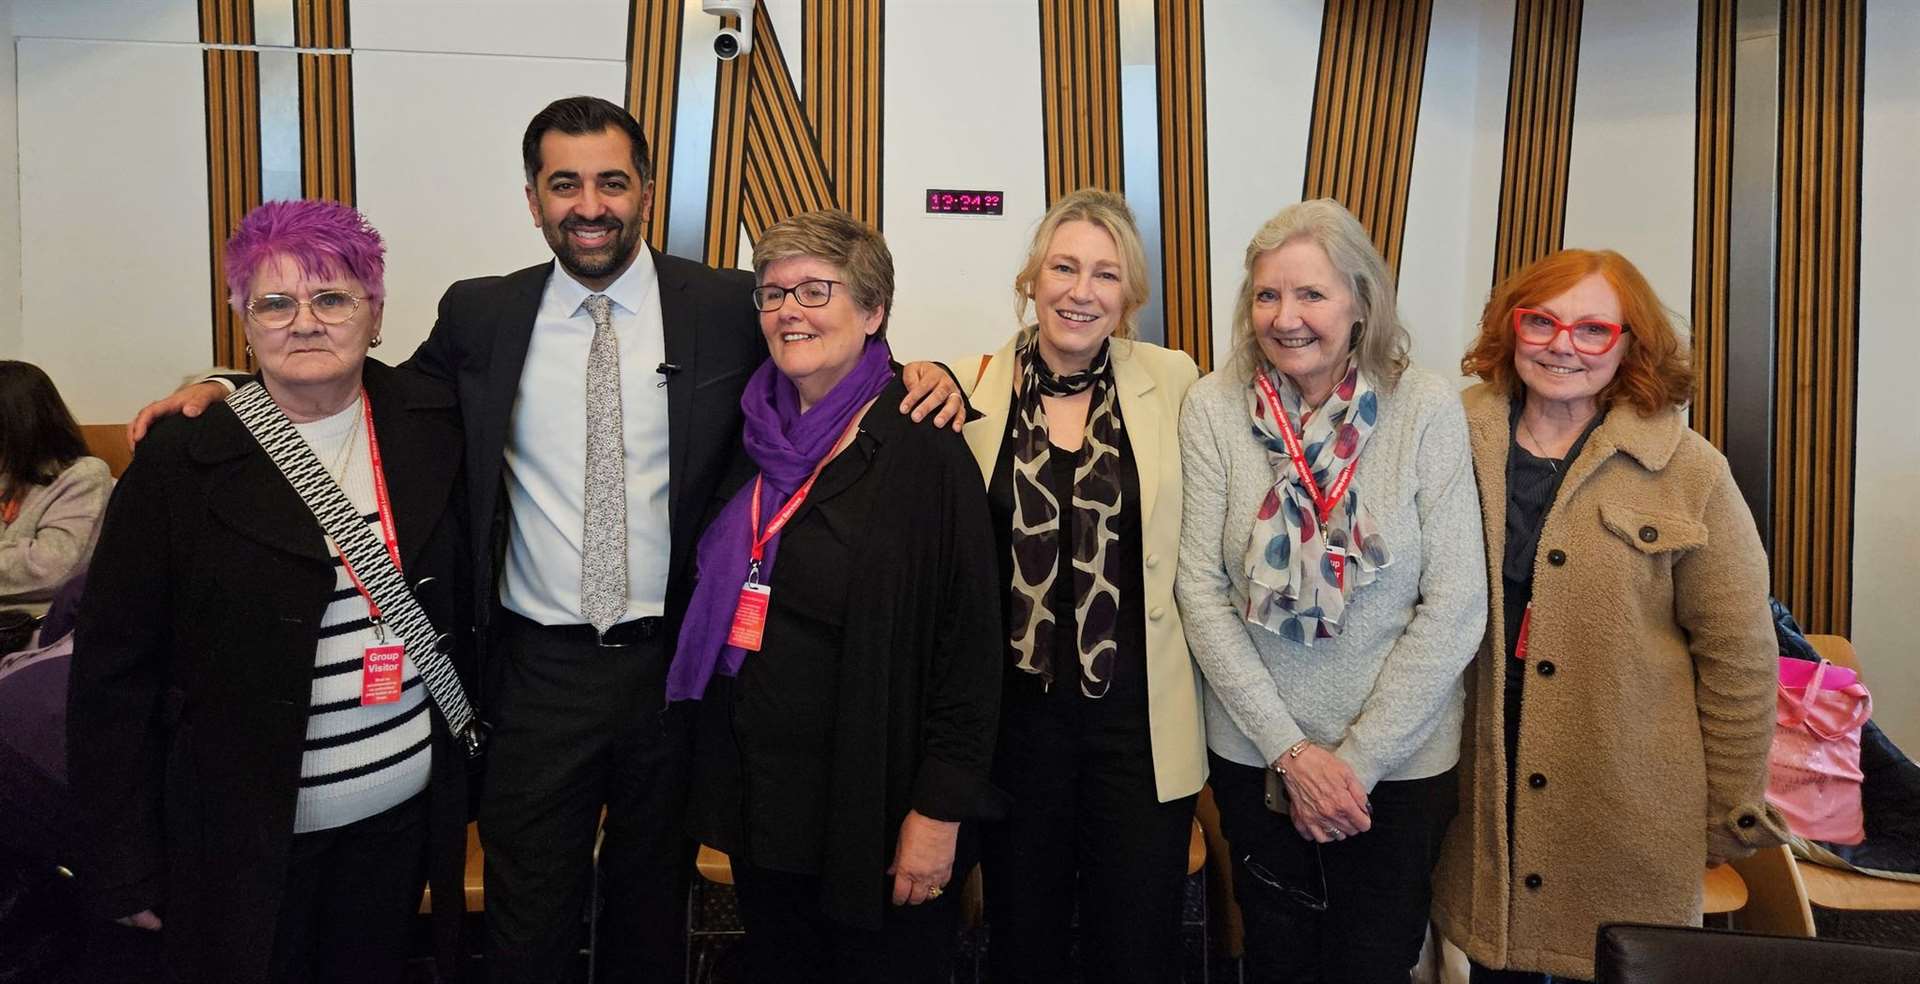 Campaigners met with the First Minister at Holyrood